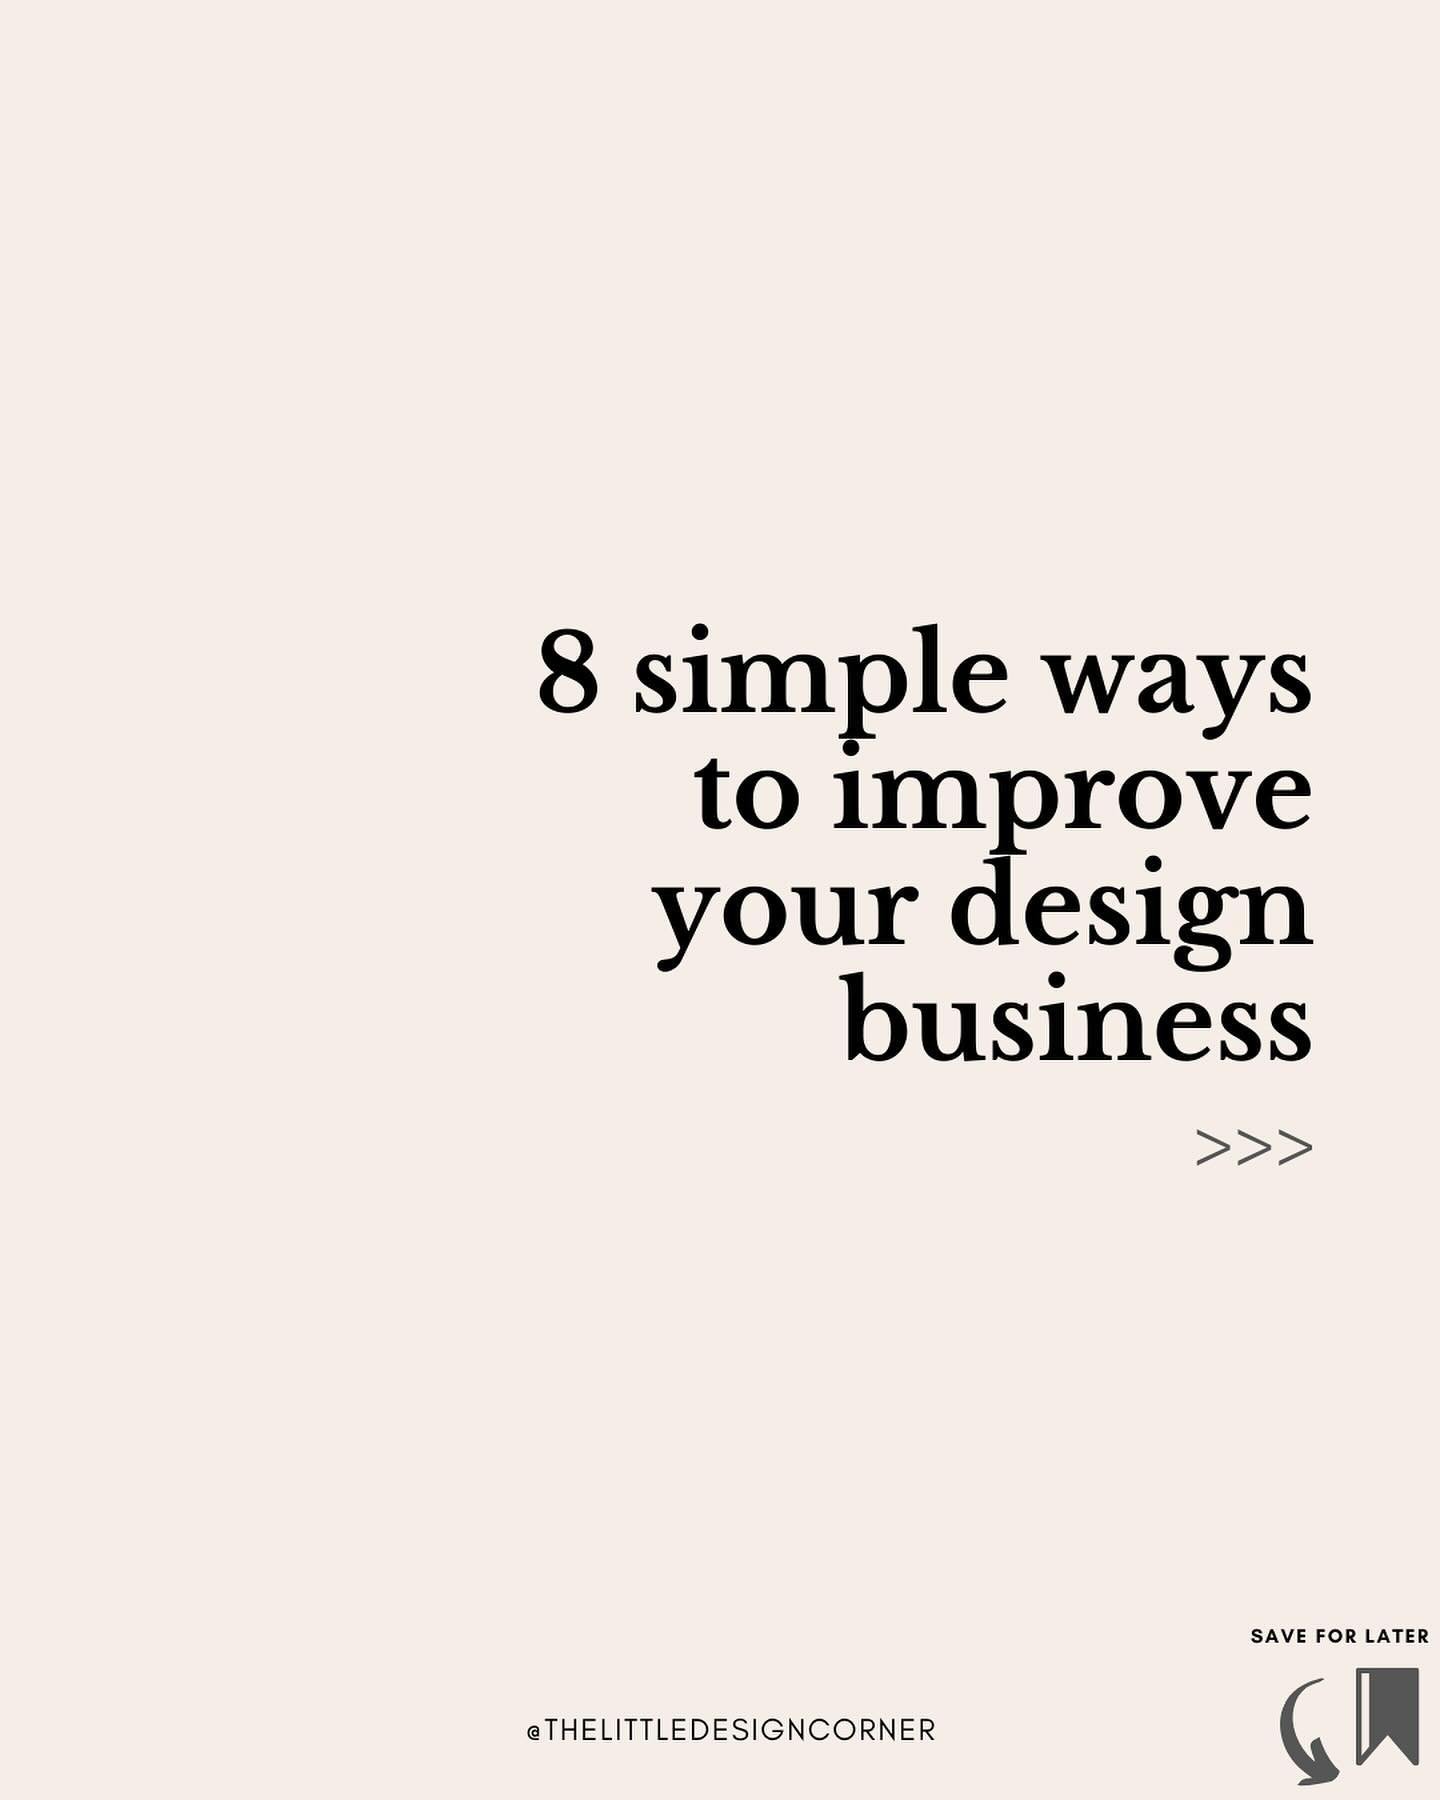 Here are 8 simple, strategic updates to make to your design business today [SWIPE &gt;&gt;&gt;]

💾 Remember to SAVE this for when you might need it

Also - if you&rsquo;re new here&hellip;

👋 Follow me&nbsp;@thelittledesigncorner&nbsp;and binge all